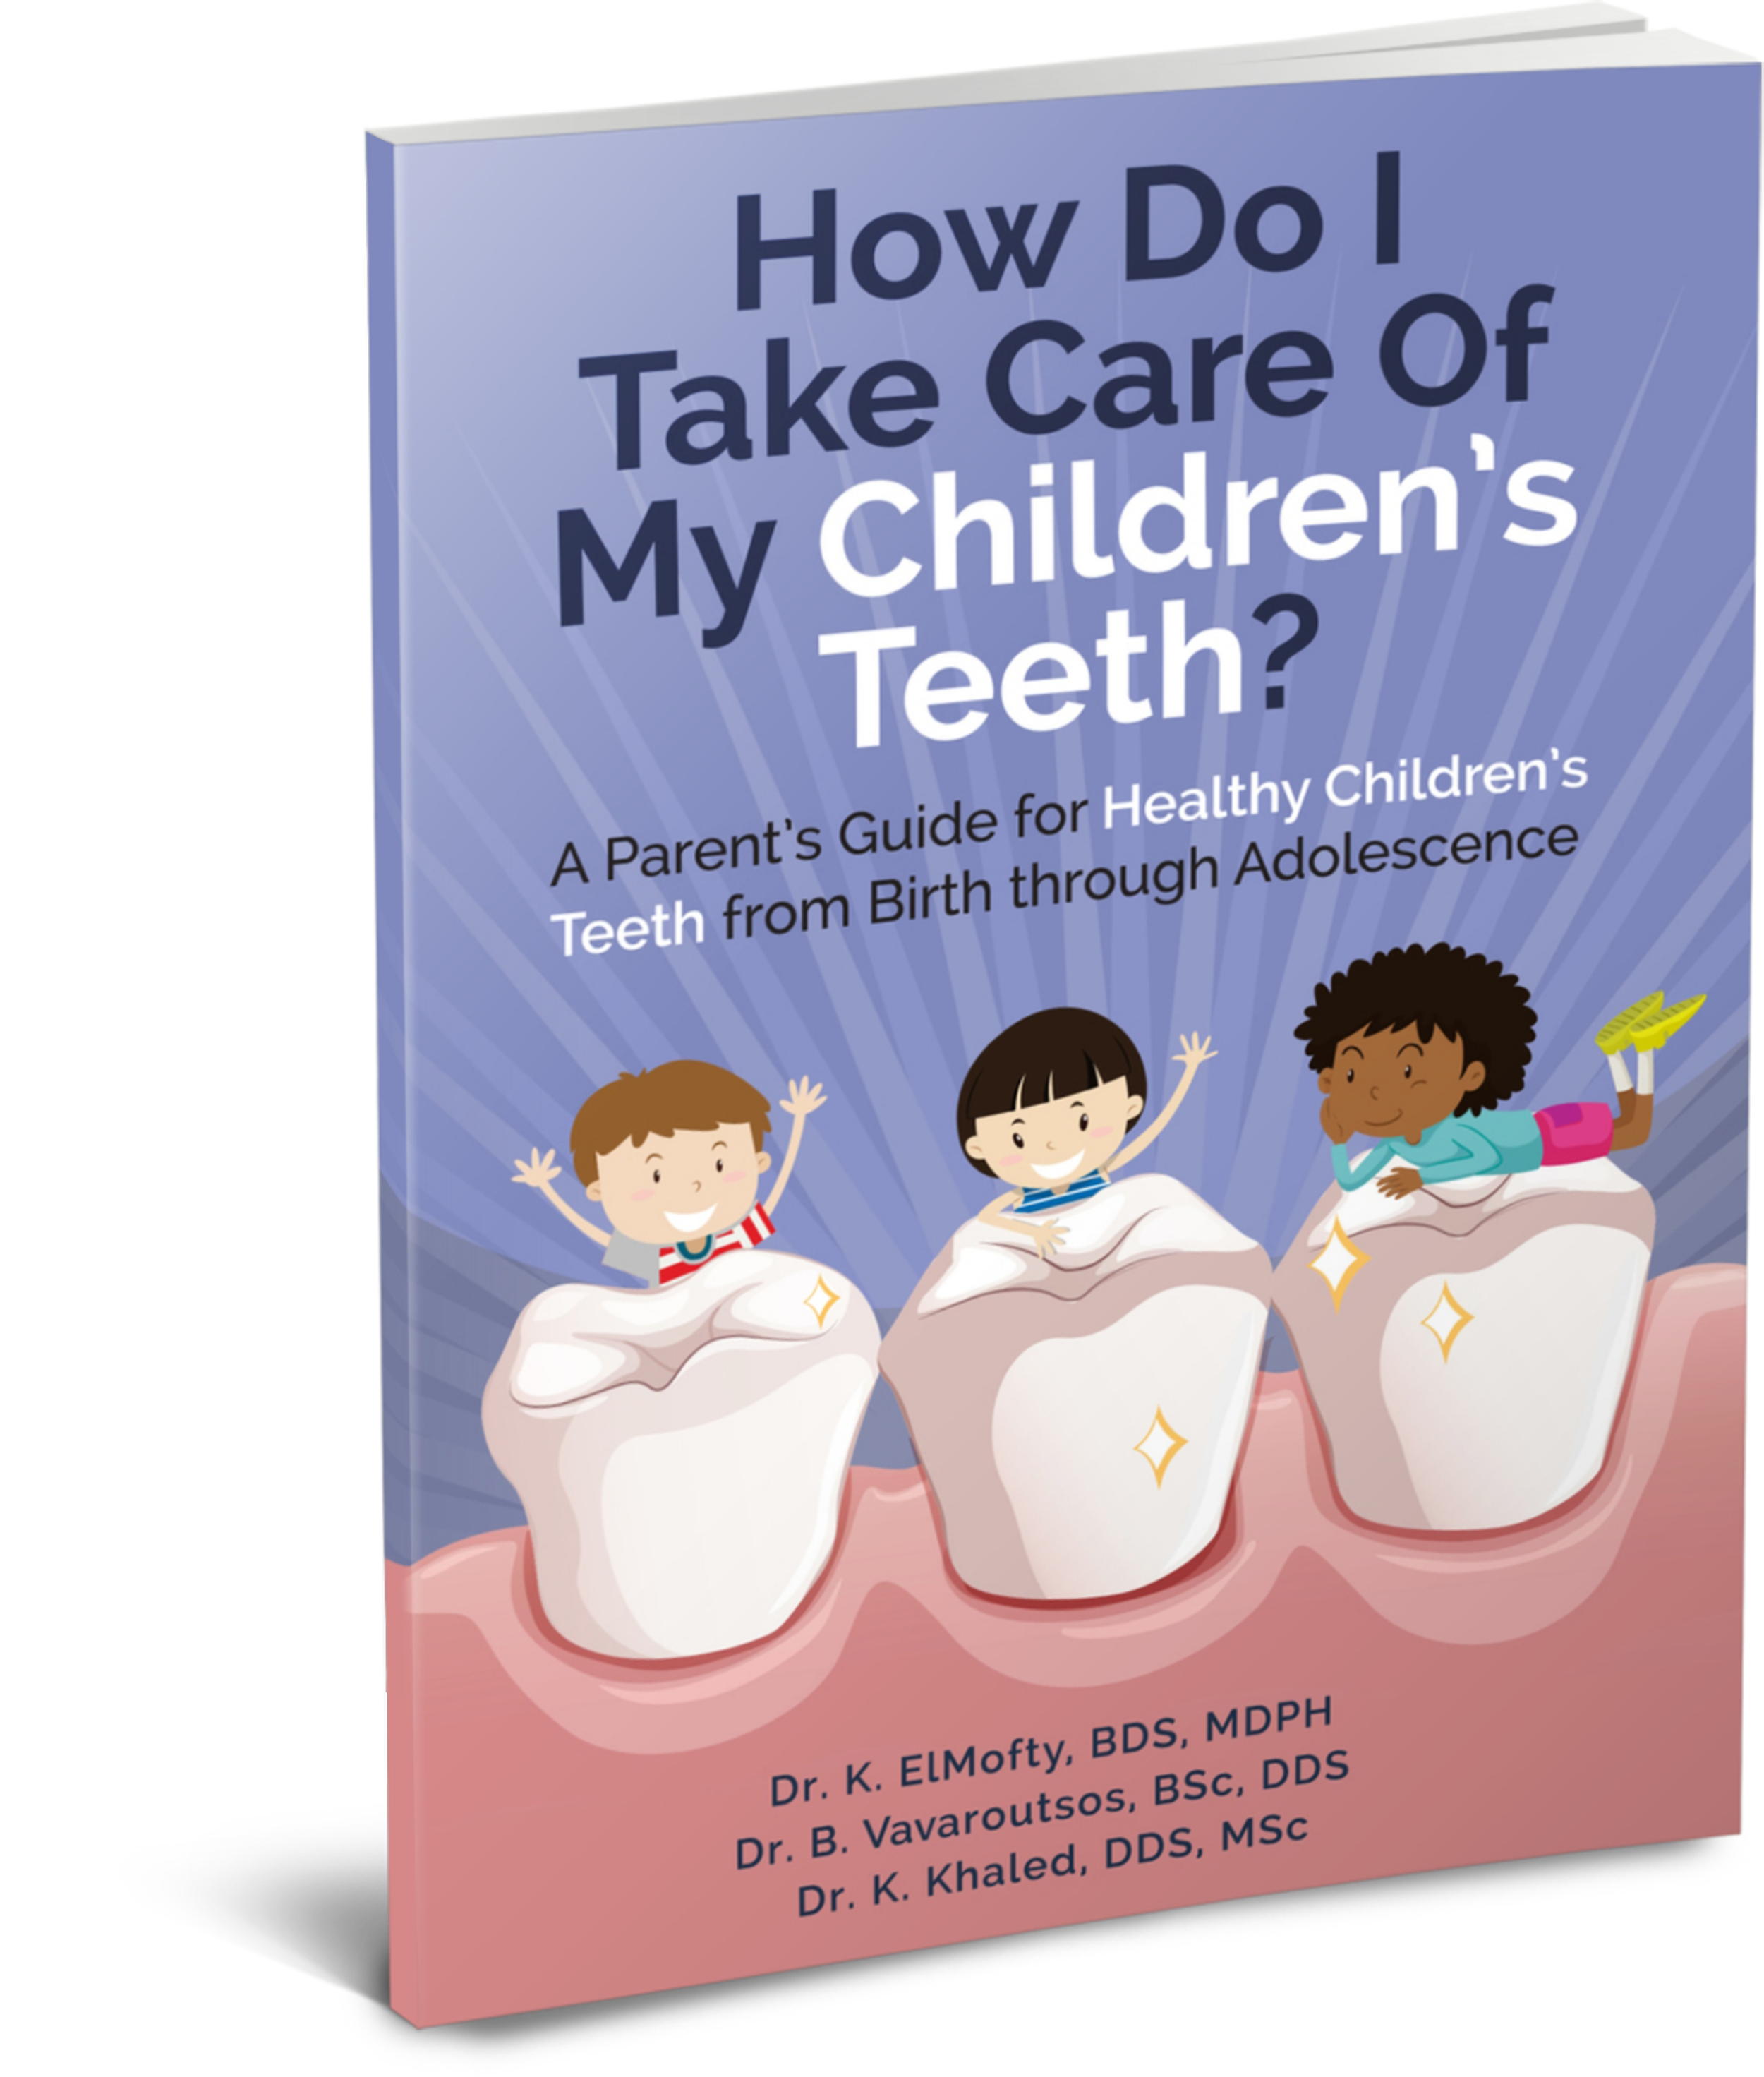  How Do I Take Care of My Children’s Teeth  Karim and his partners at Southdown are passionate about dispelling dental myths and providing great information and have established KnowDental.ca as an educational resource   Listen as Karim helps improve